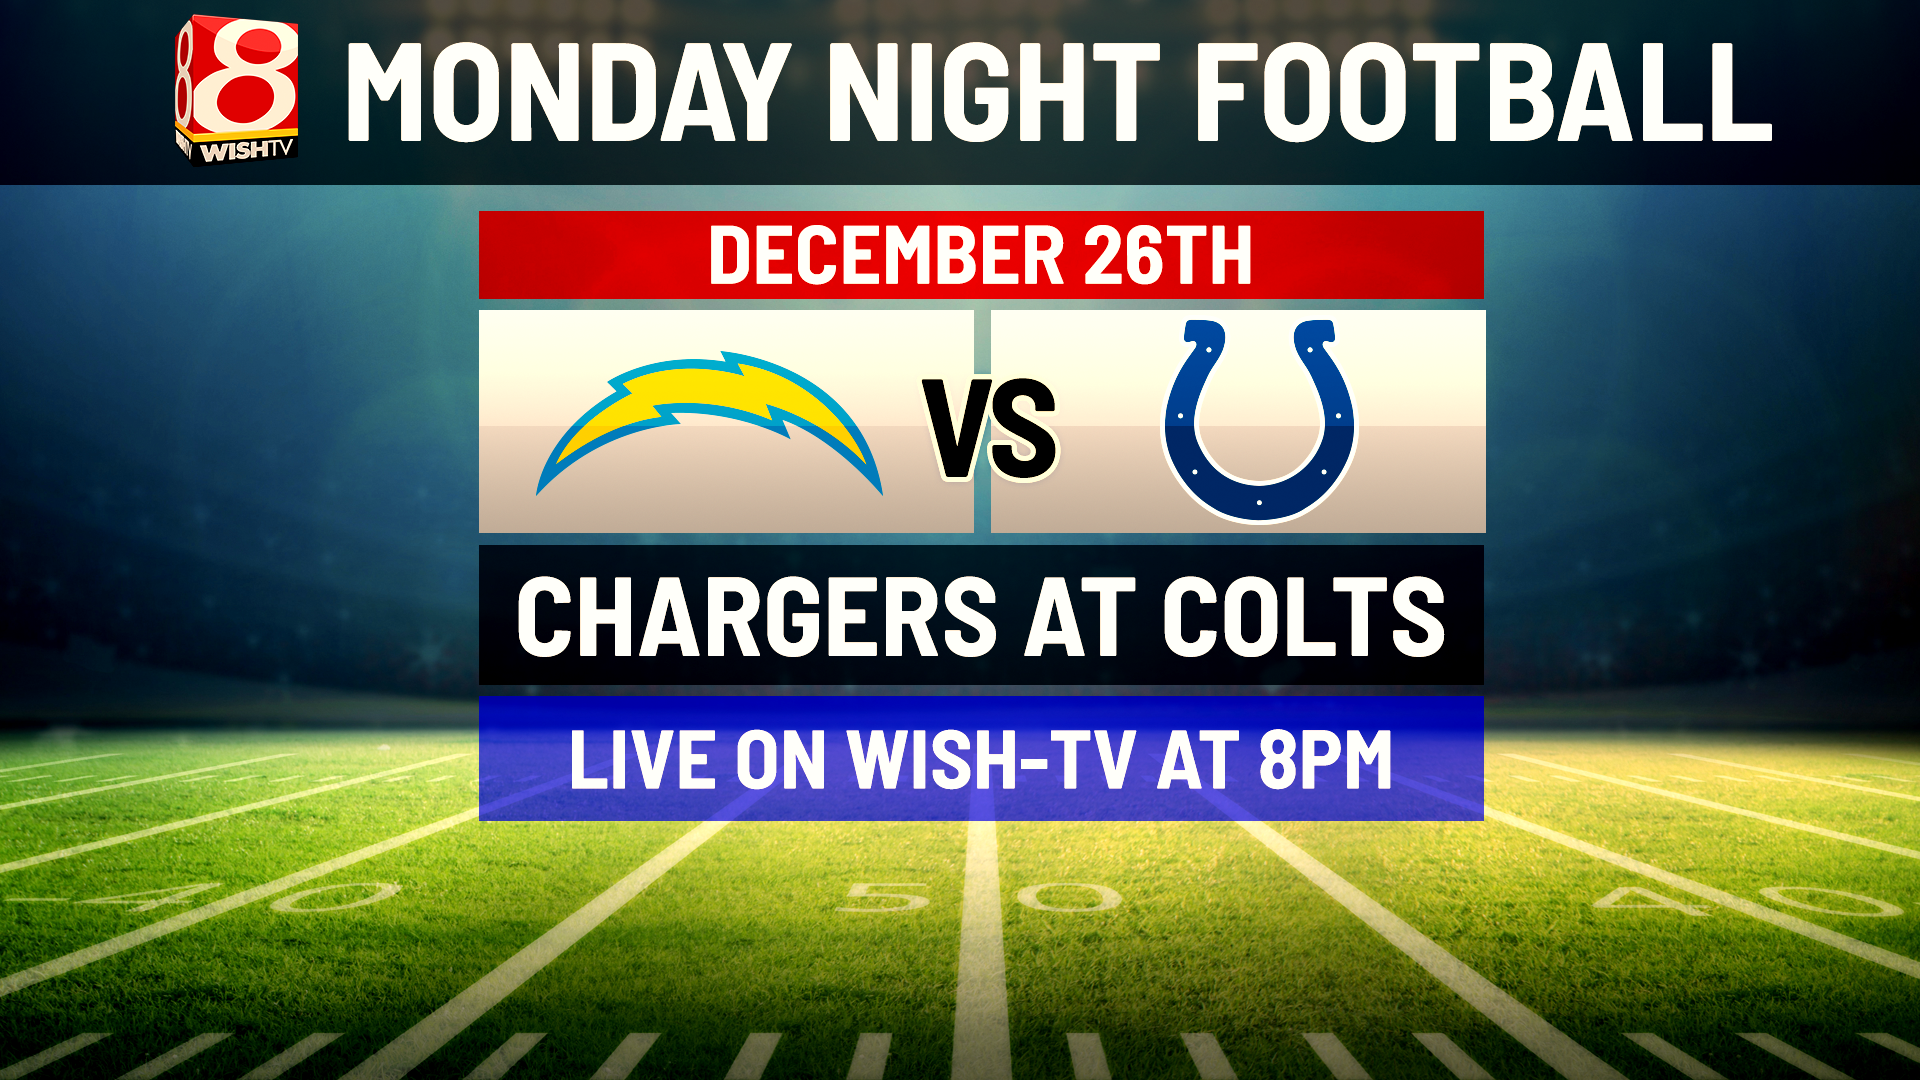 Watch the Chargers play the Colts on Monday Night Football on WISH